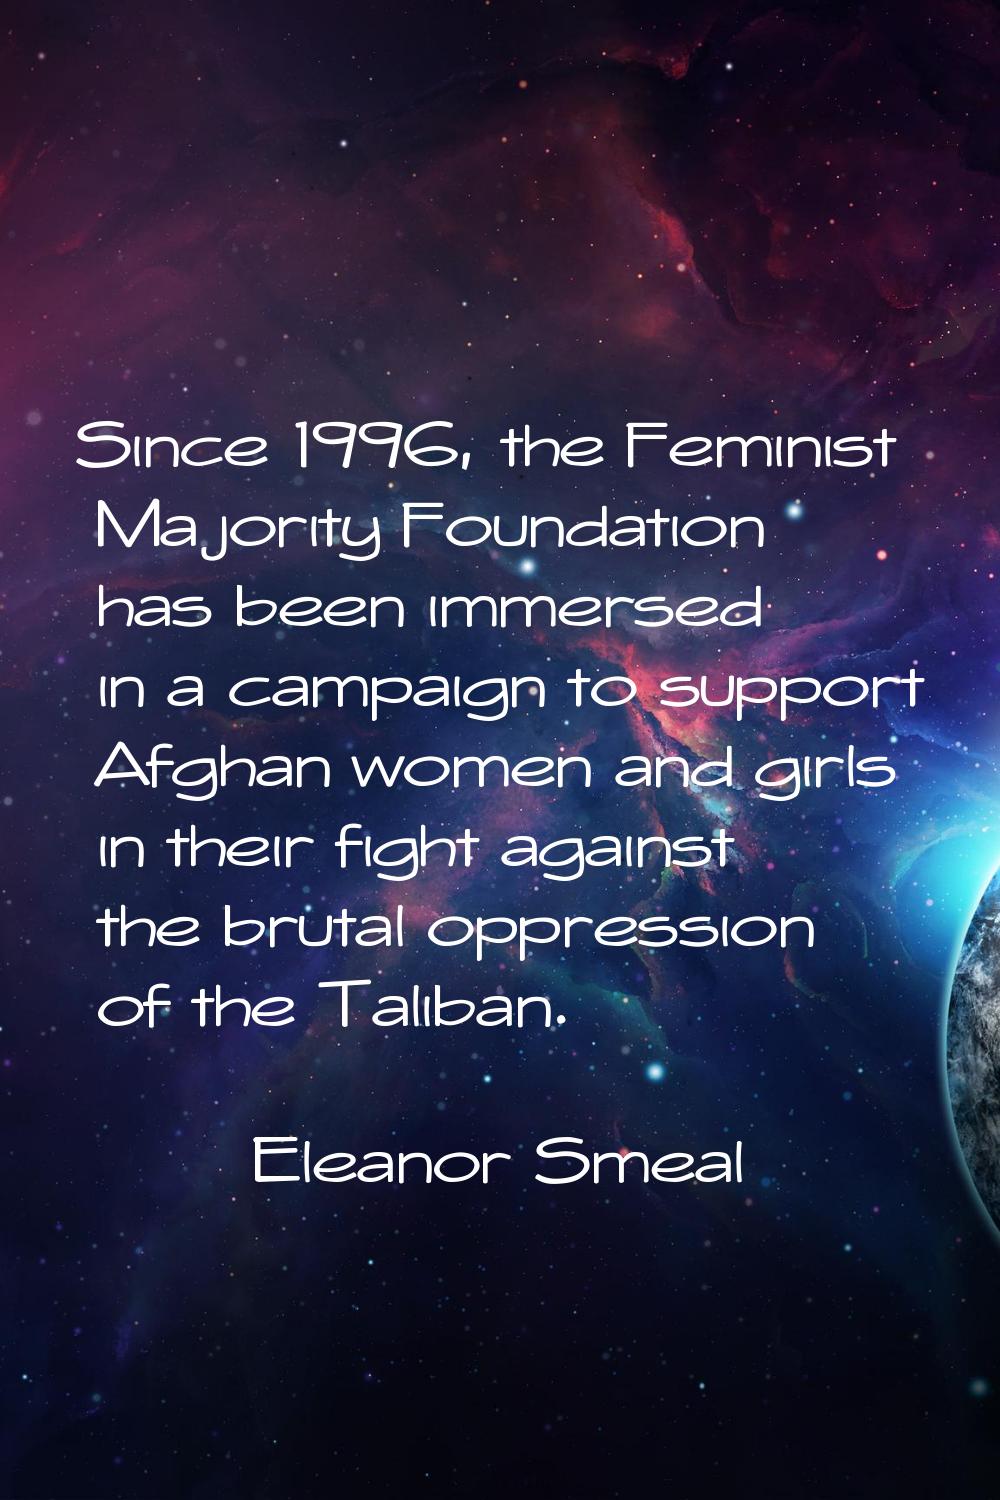 Since 1996, the Feminist Majority Foundation has been immersed in a campaign to support Afghan wome